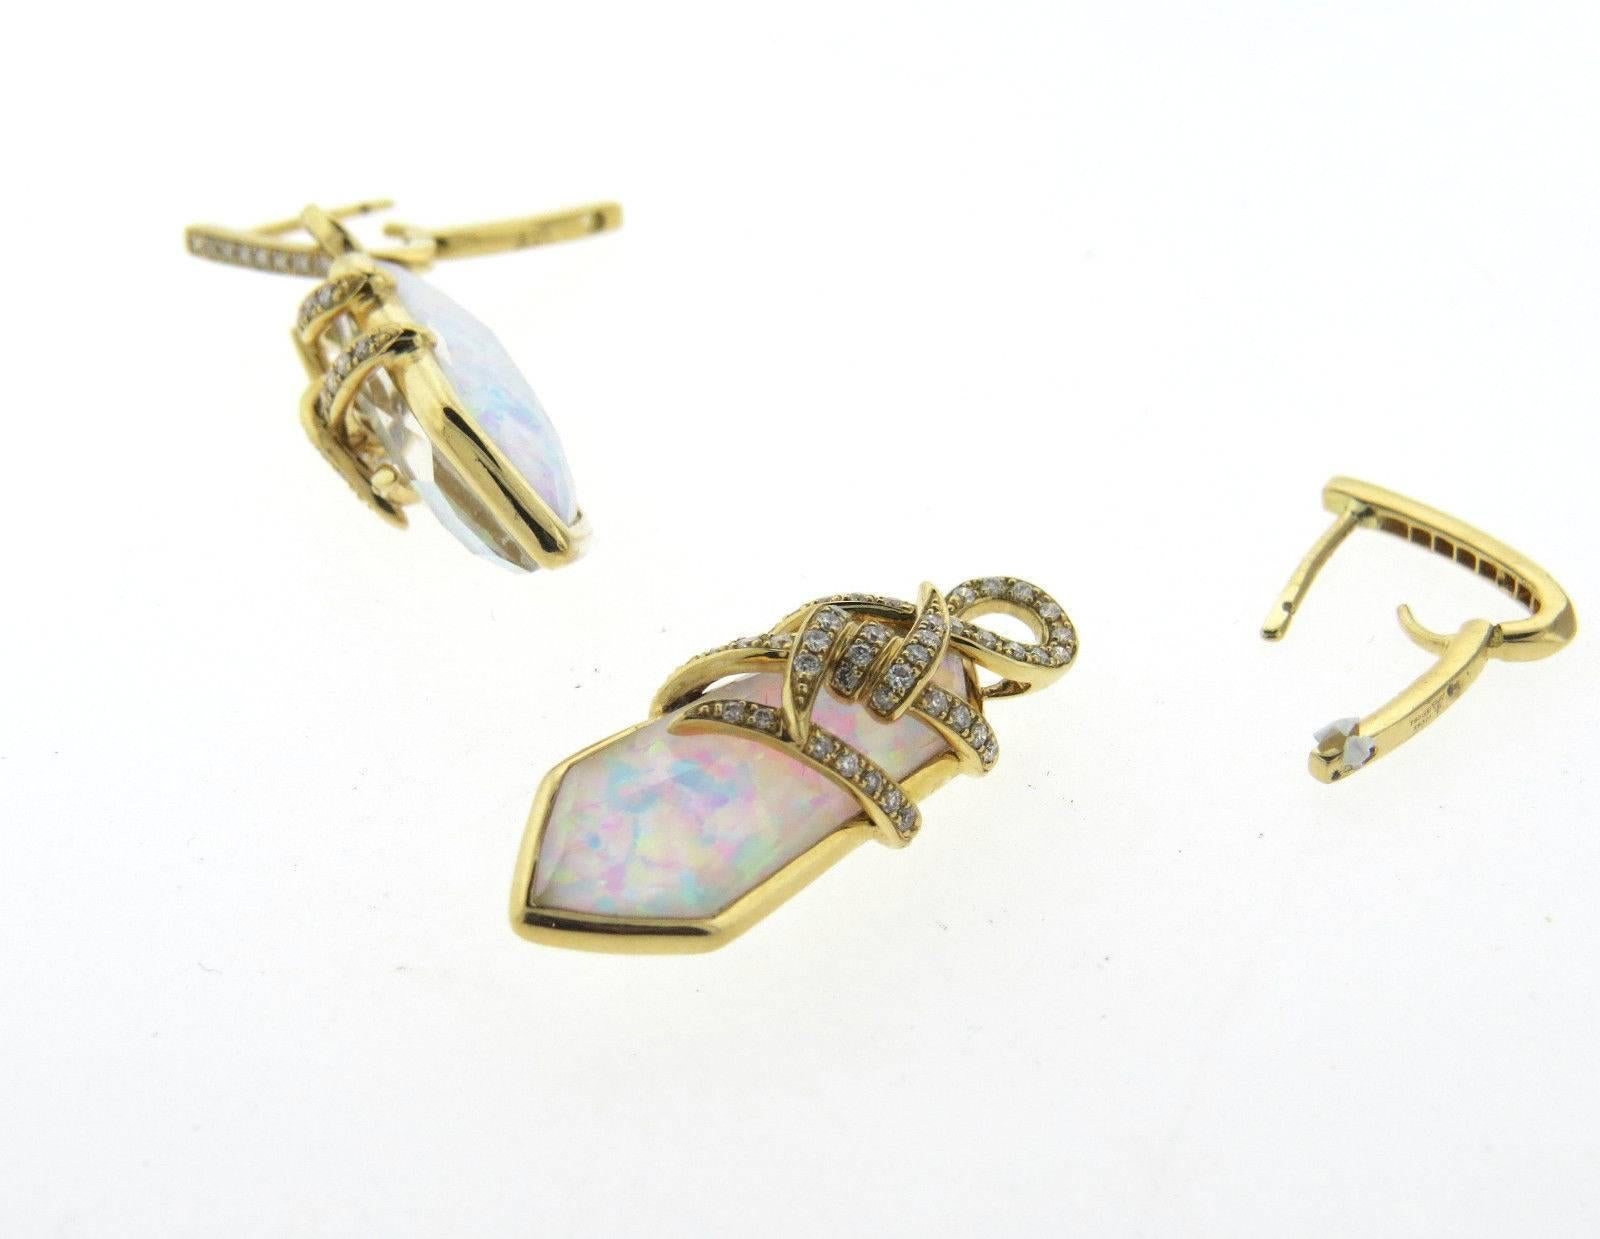 A pair of 18k yellow gold earrings set with approximately 0.65ctw of H/VS diamonds and opal drops.  Crafted by Stephen Webster, the earrings measure 40mm long x 10mm wide (opal drops are removable). Marked 750, Webster mark, SW321.  WEIGHT	10g